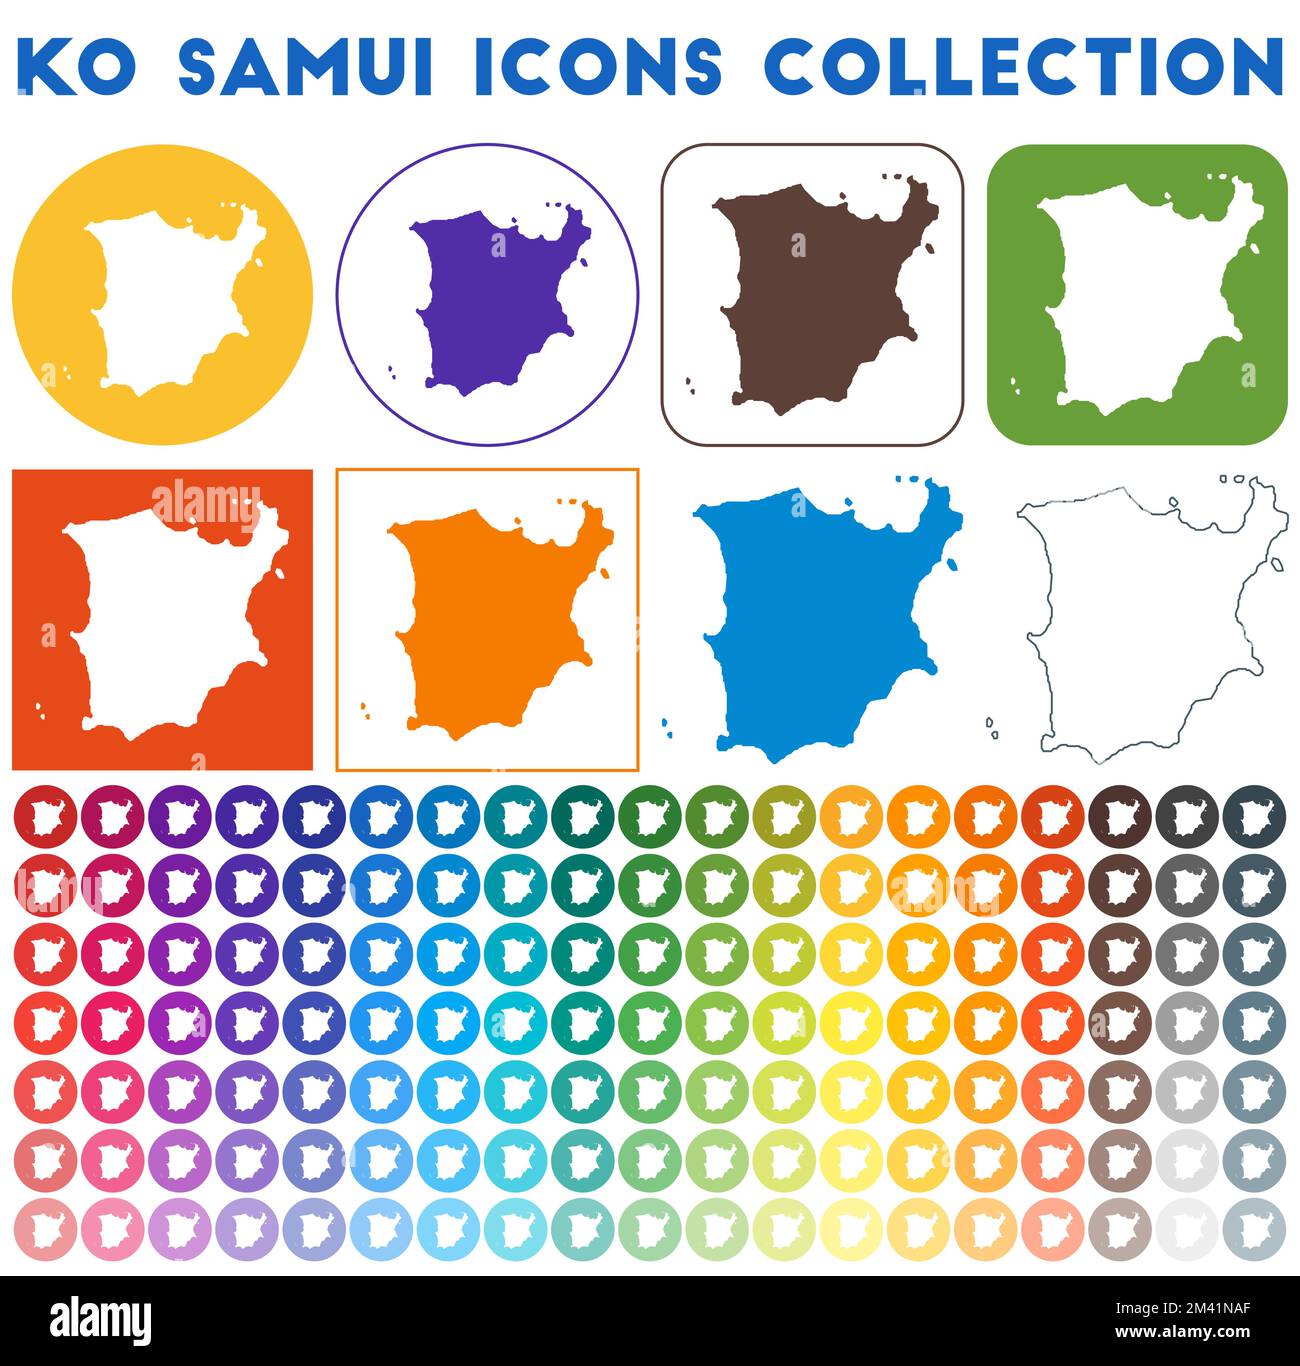 Ko Samui icons collection. Bright colourful trendy map icons. Modern Ko Samui badge with island map. Vector illustration. Stock Vector